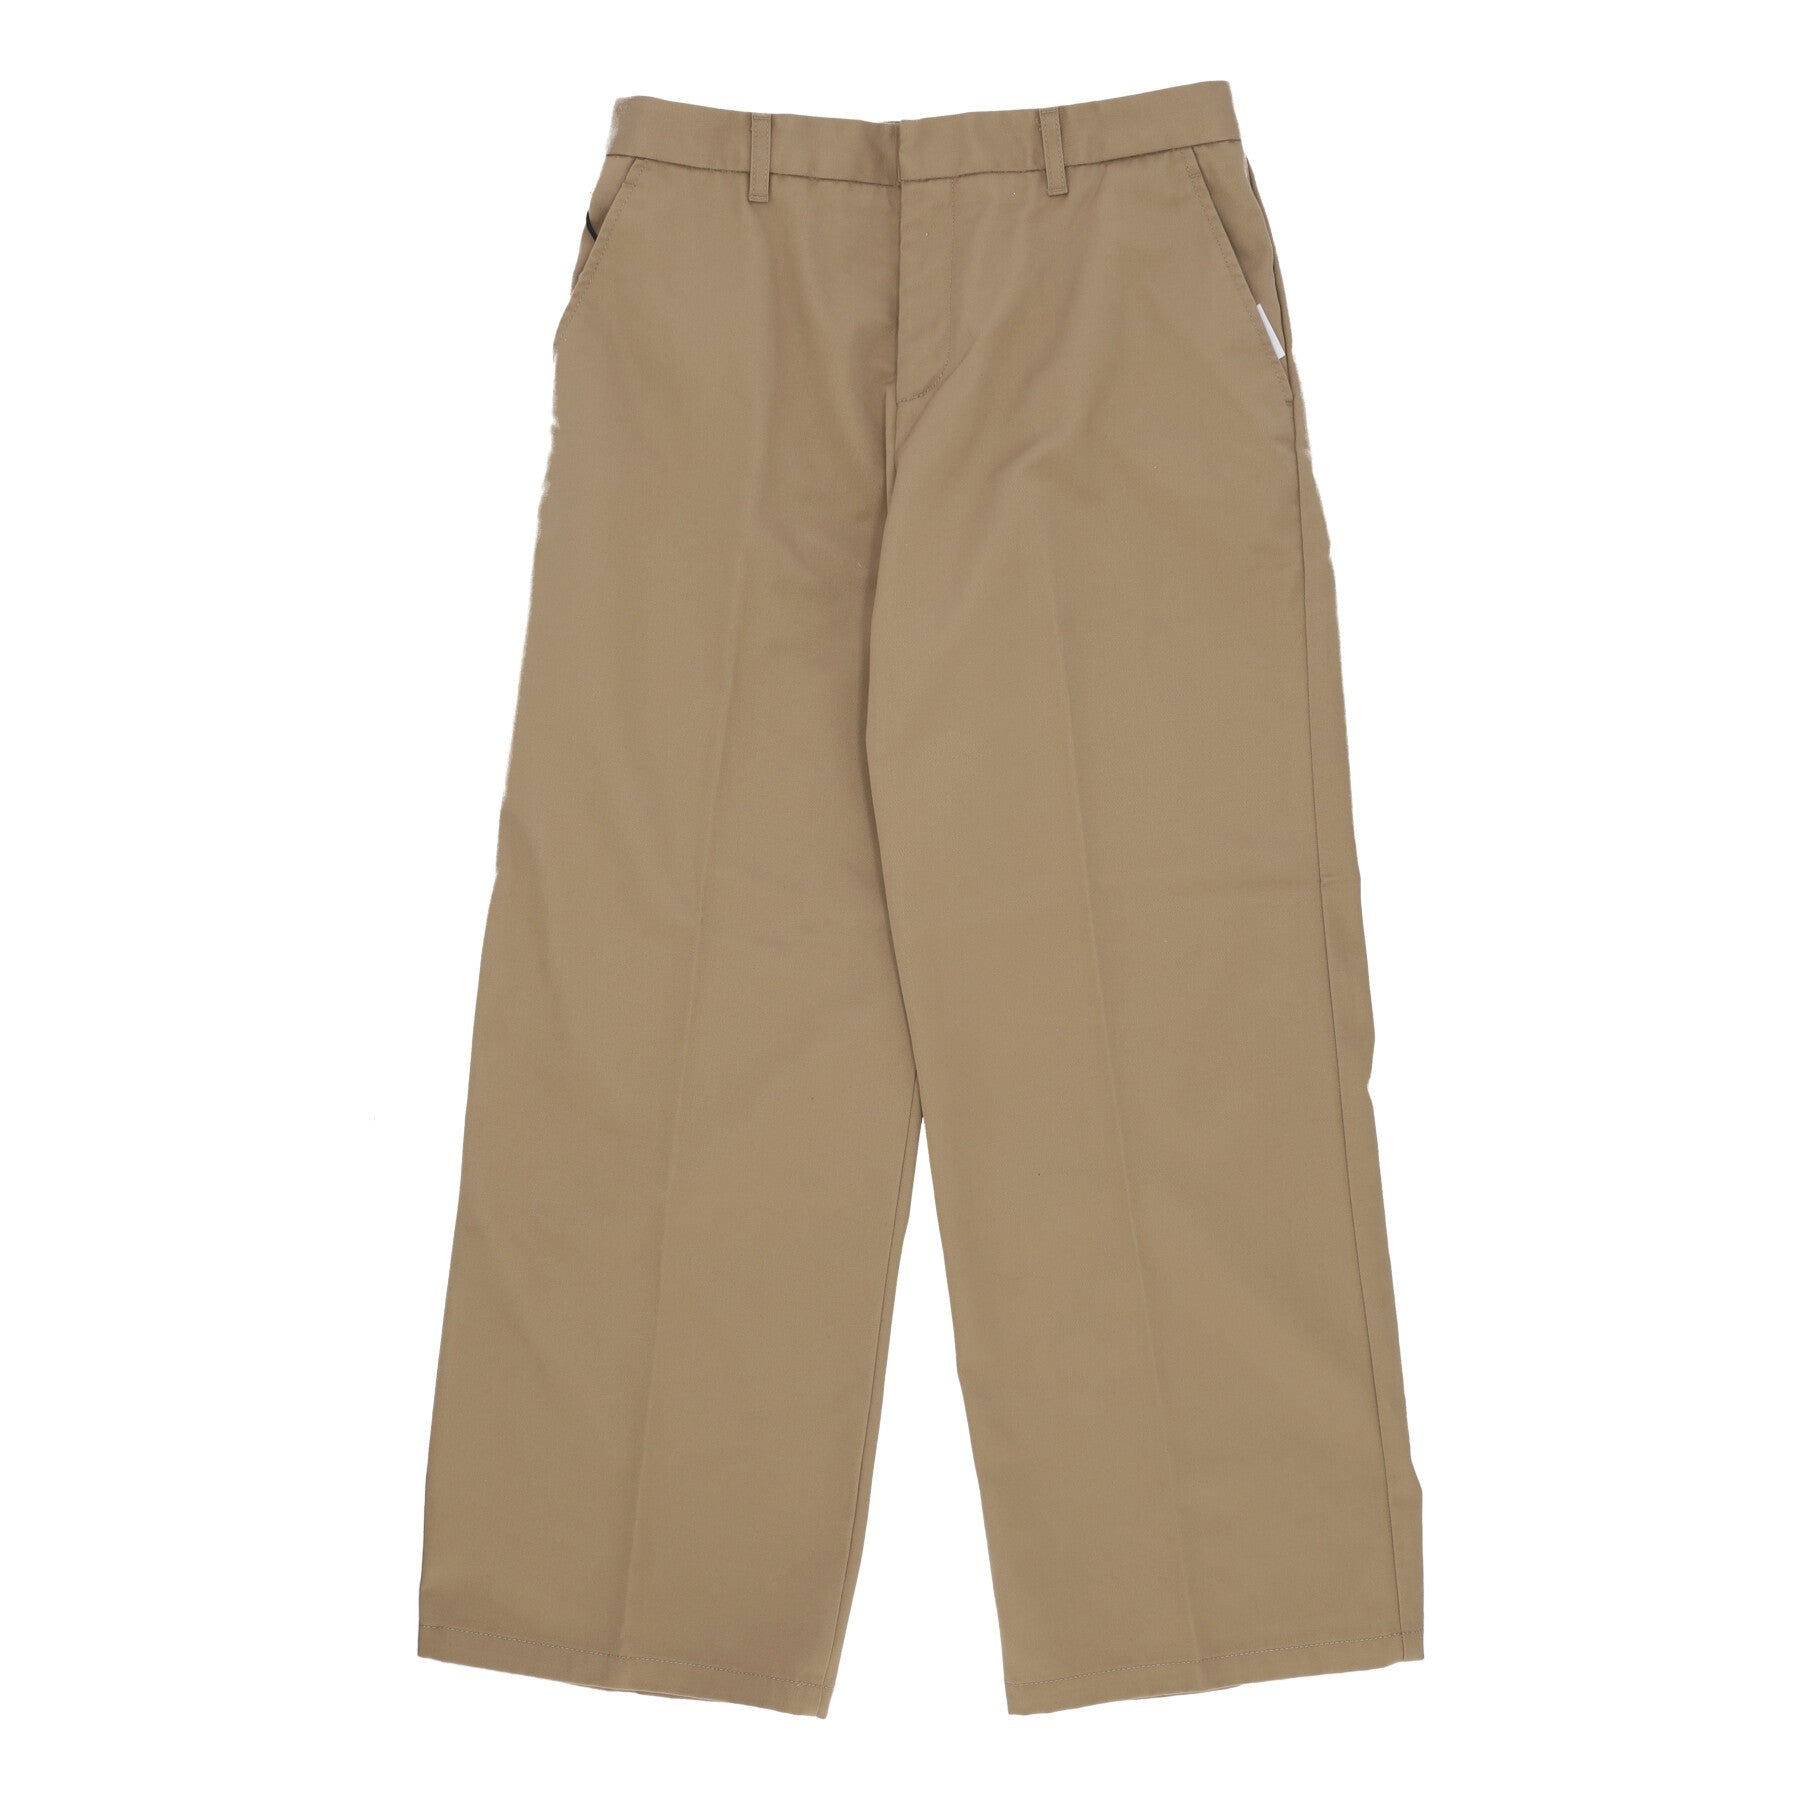 Carhartt Wip, Pantalone Lungo Donna W Omaha Pant, Leather Rinsed